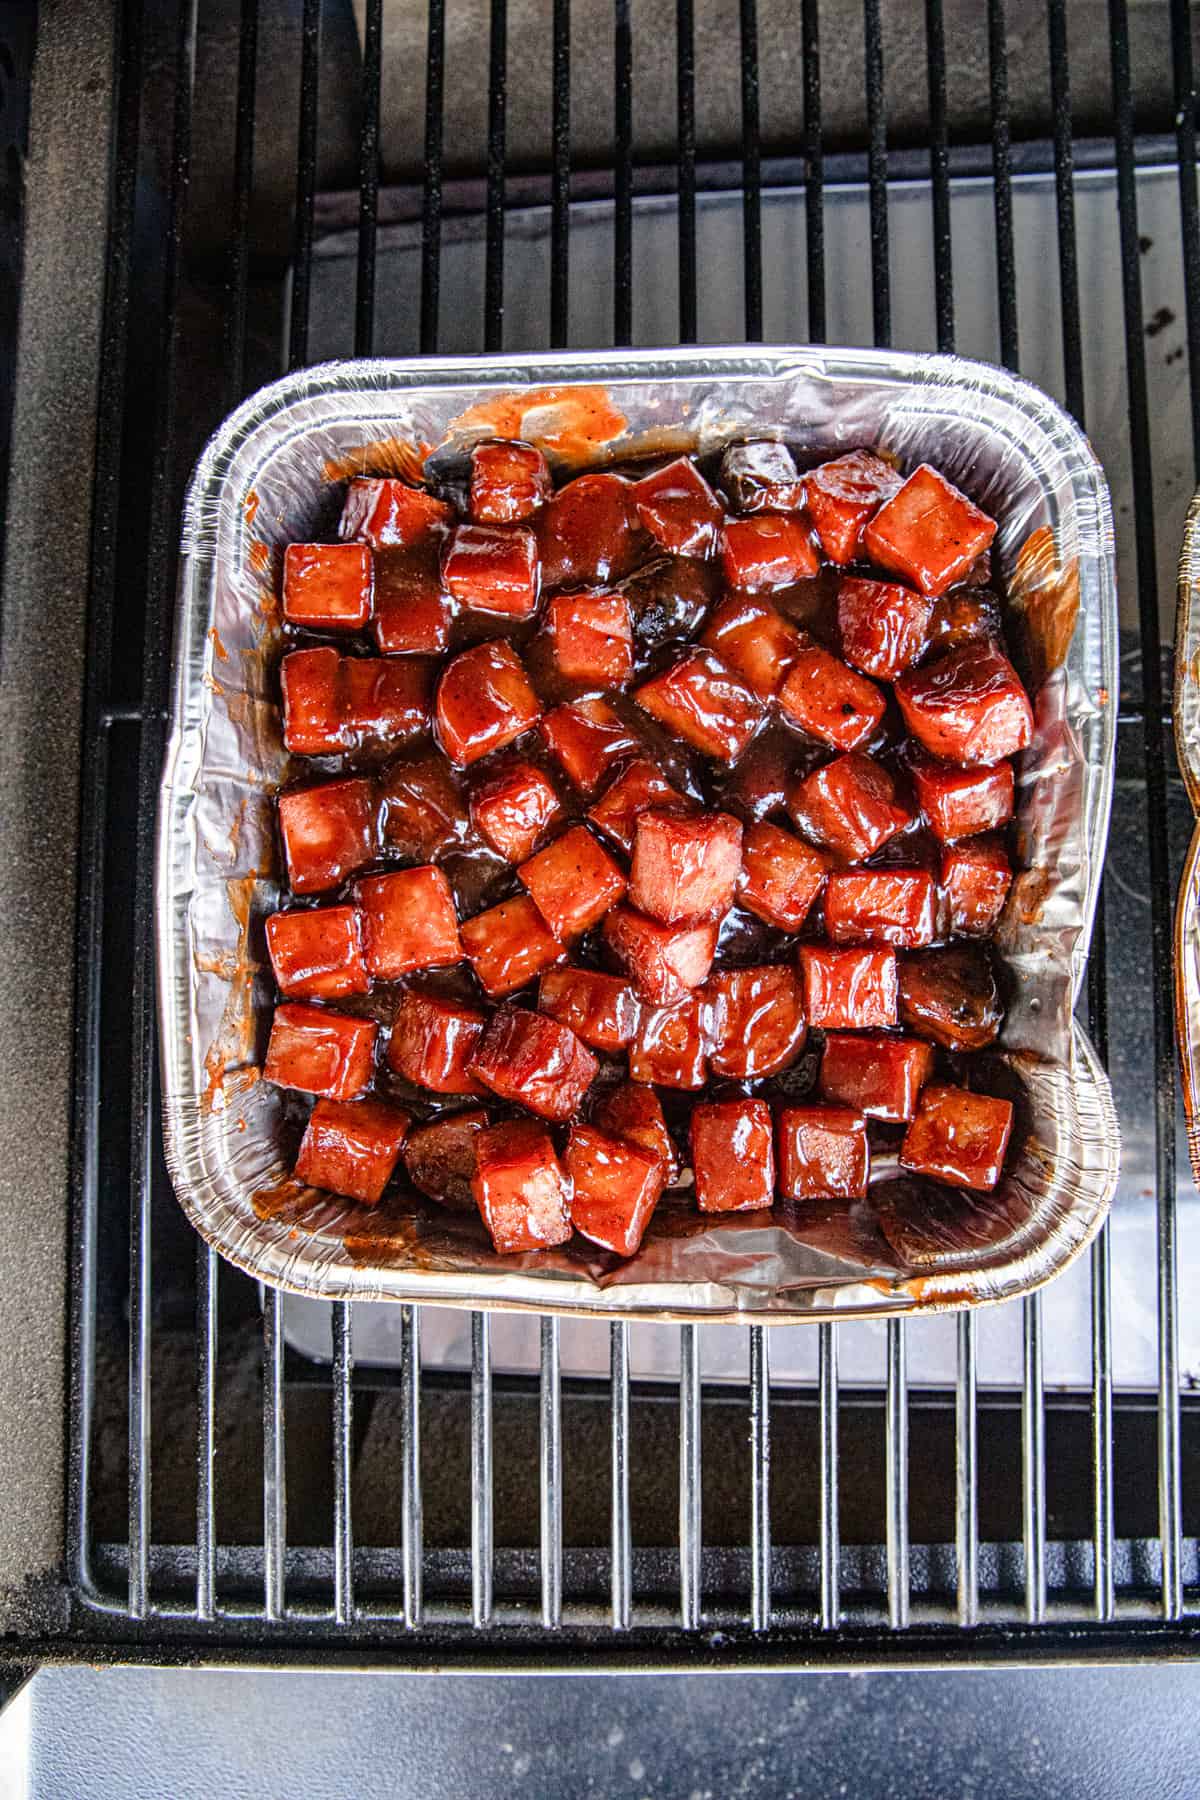 Spam Burnt Ends lathered in BBQ sauce in square tin on smoker